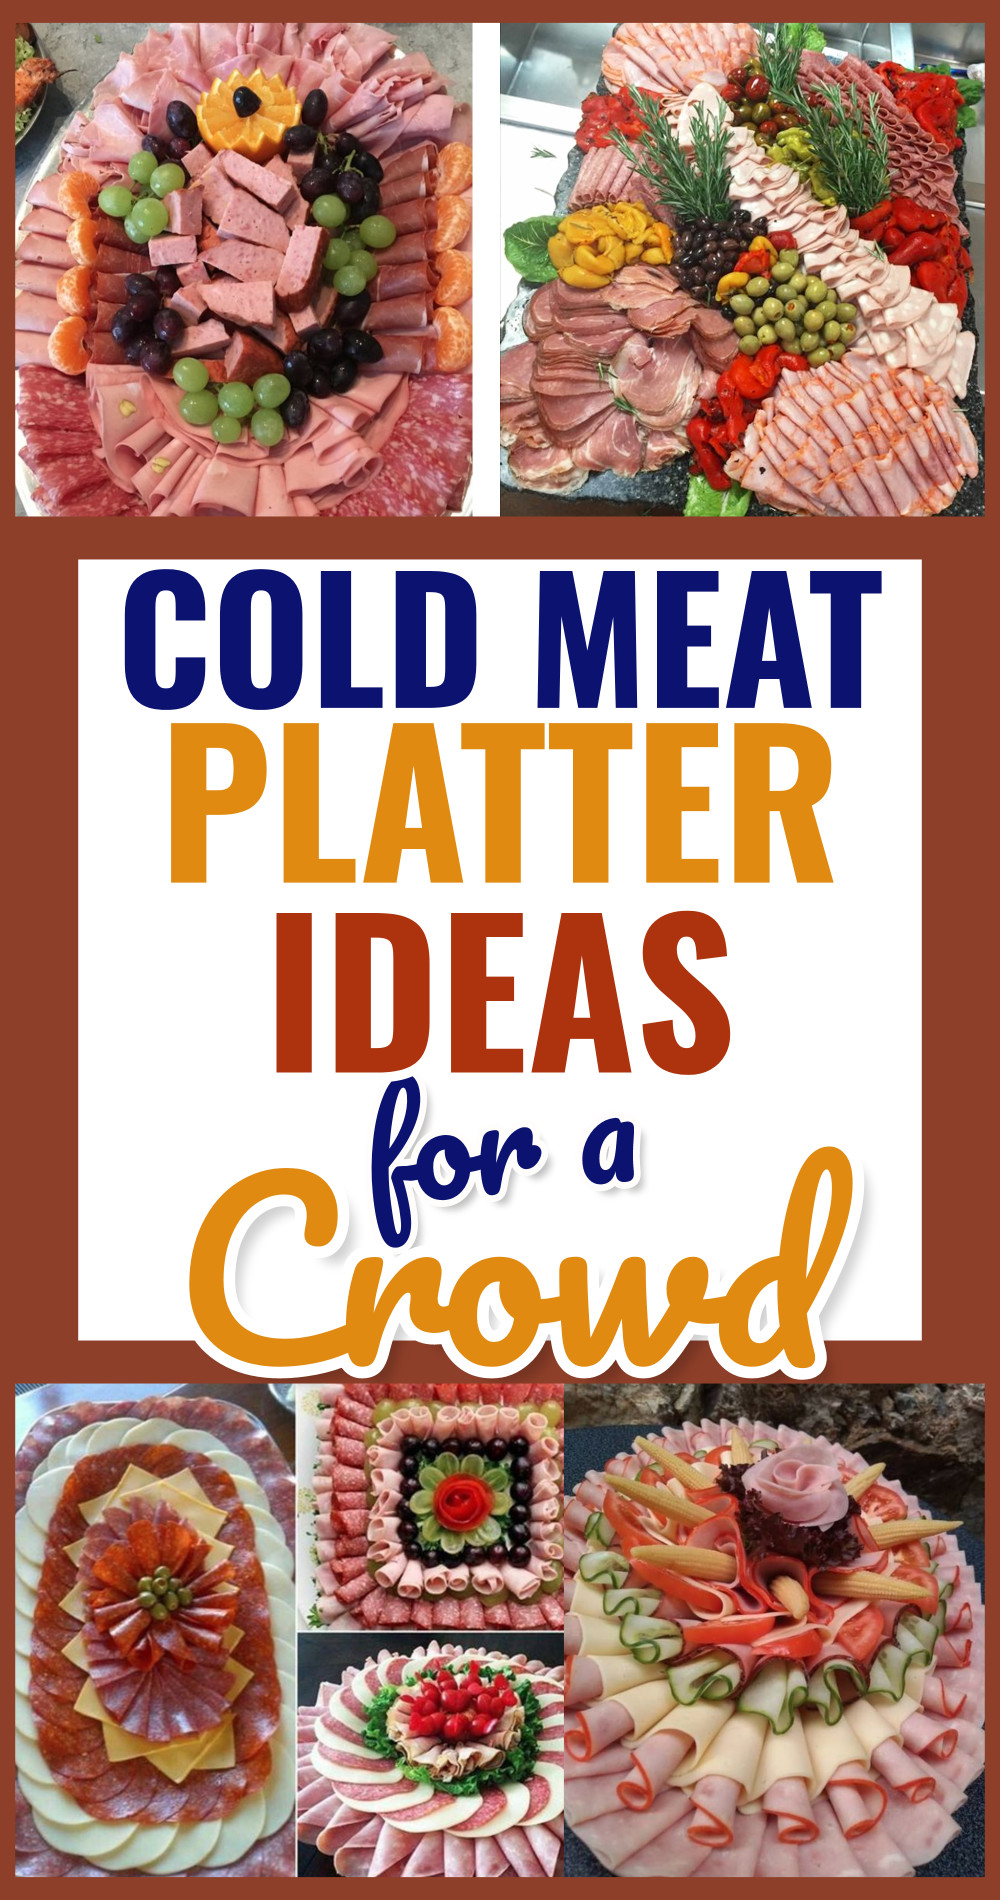 6 cold meat platter ideas for a crowd